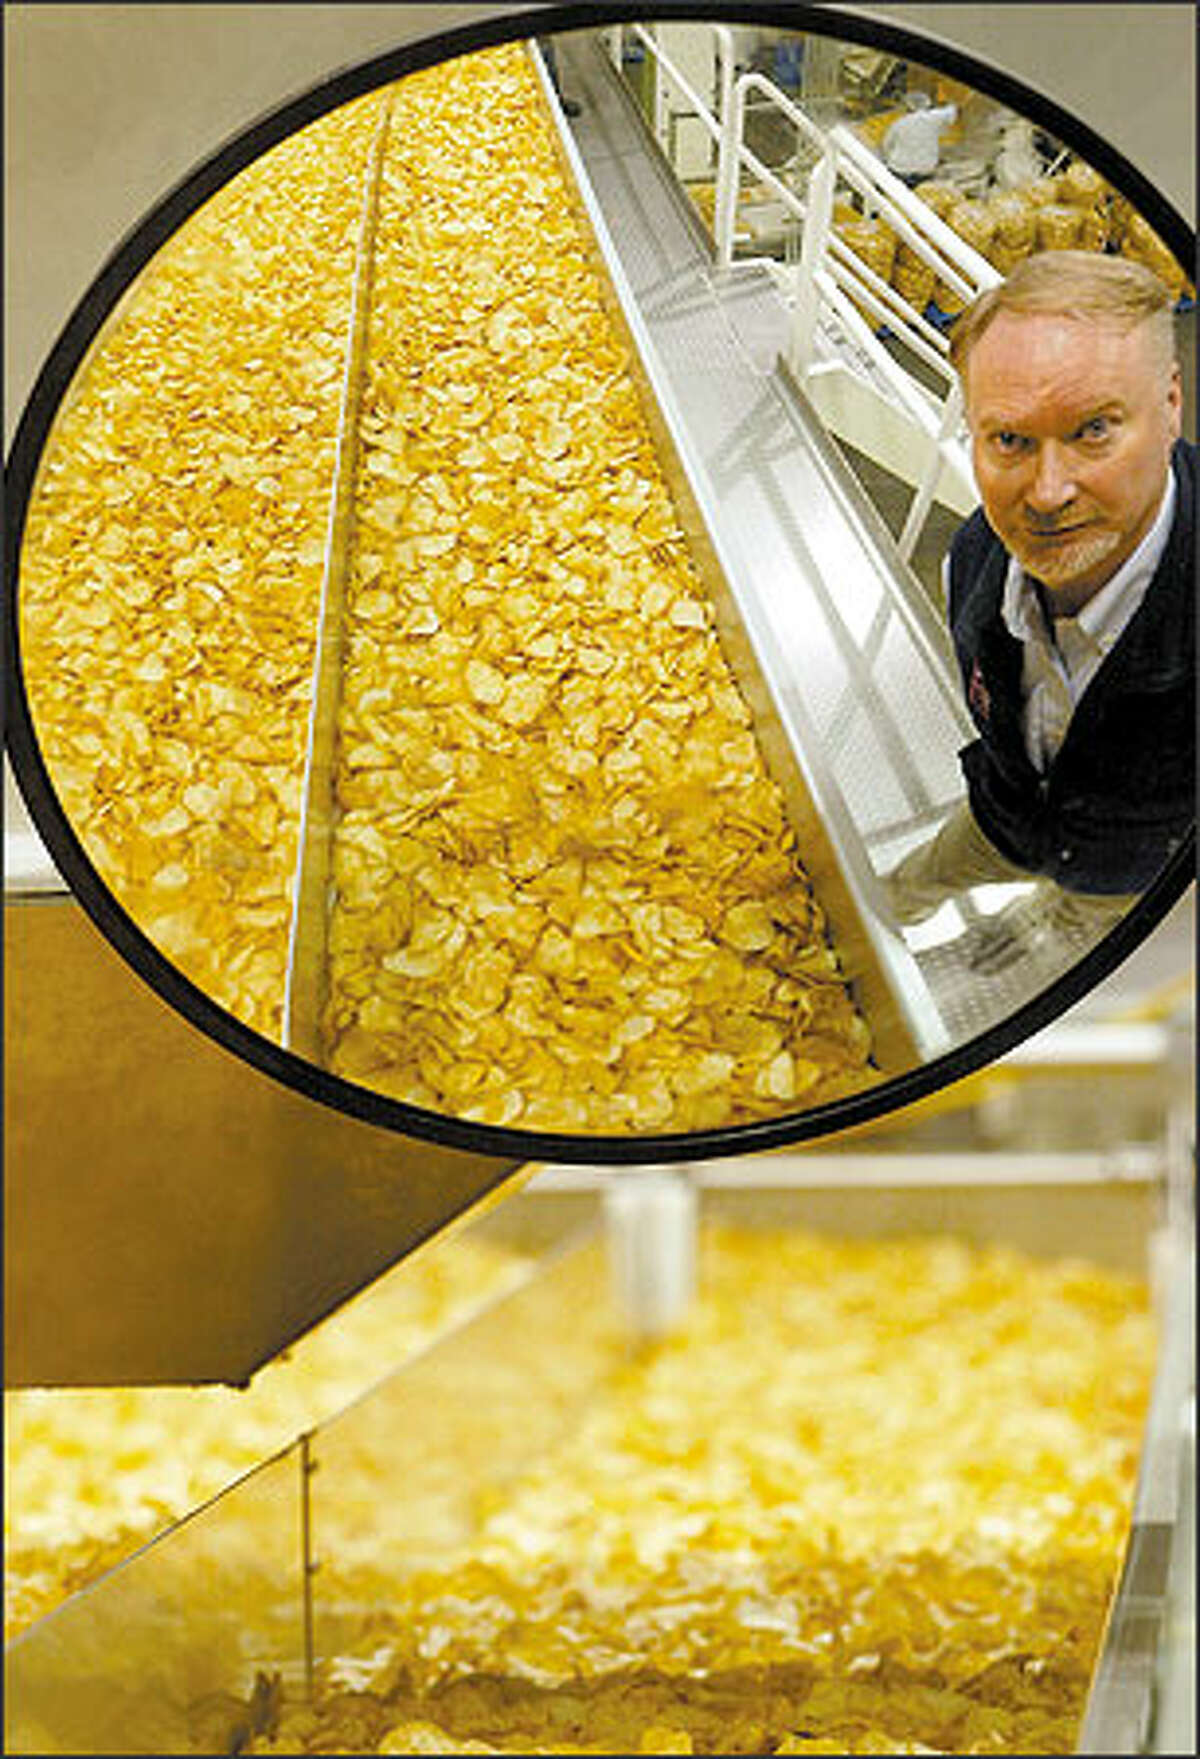 Tim Kennedy, the founder of Tim's Cascade, is reflected in a mirror as his potato chips pass by on their way to be seasoned. Original and Hot! Jalapeño flavors are always the top sellers, but Cracked Peppercorn is getting recent publicity.